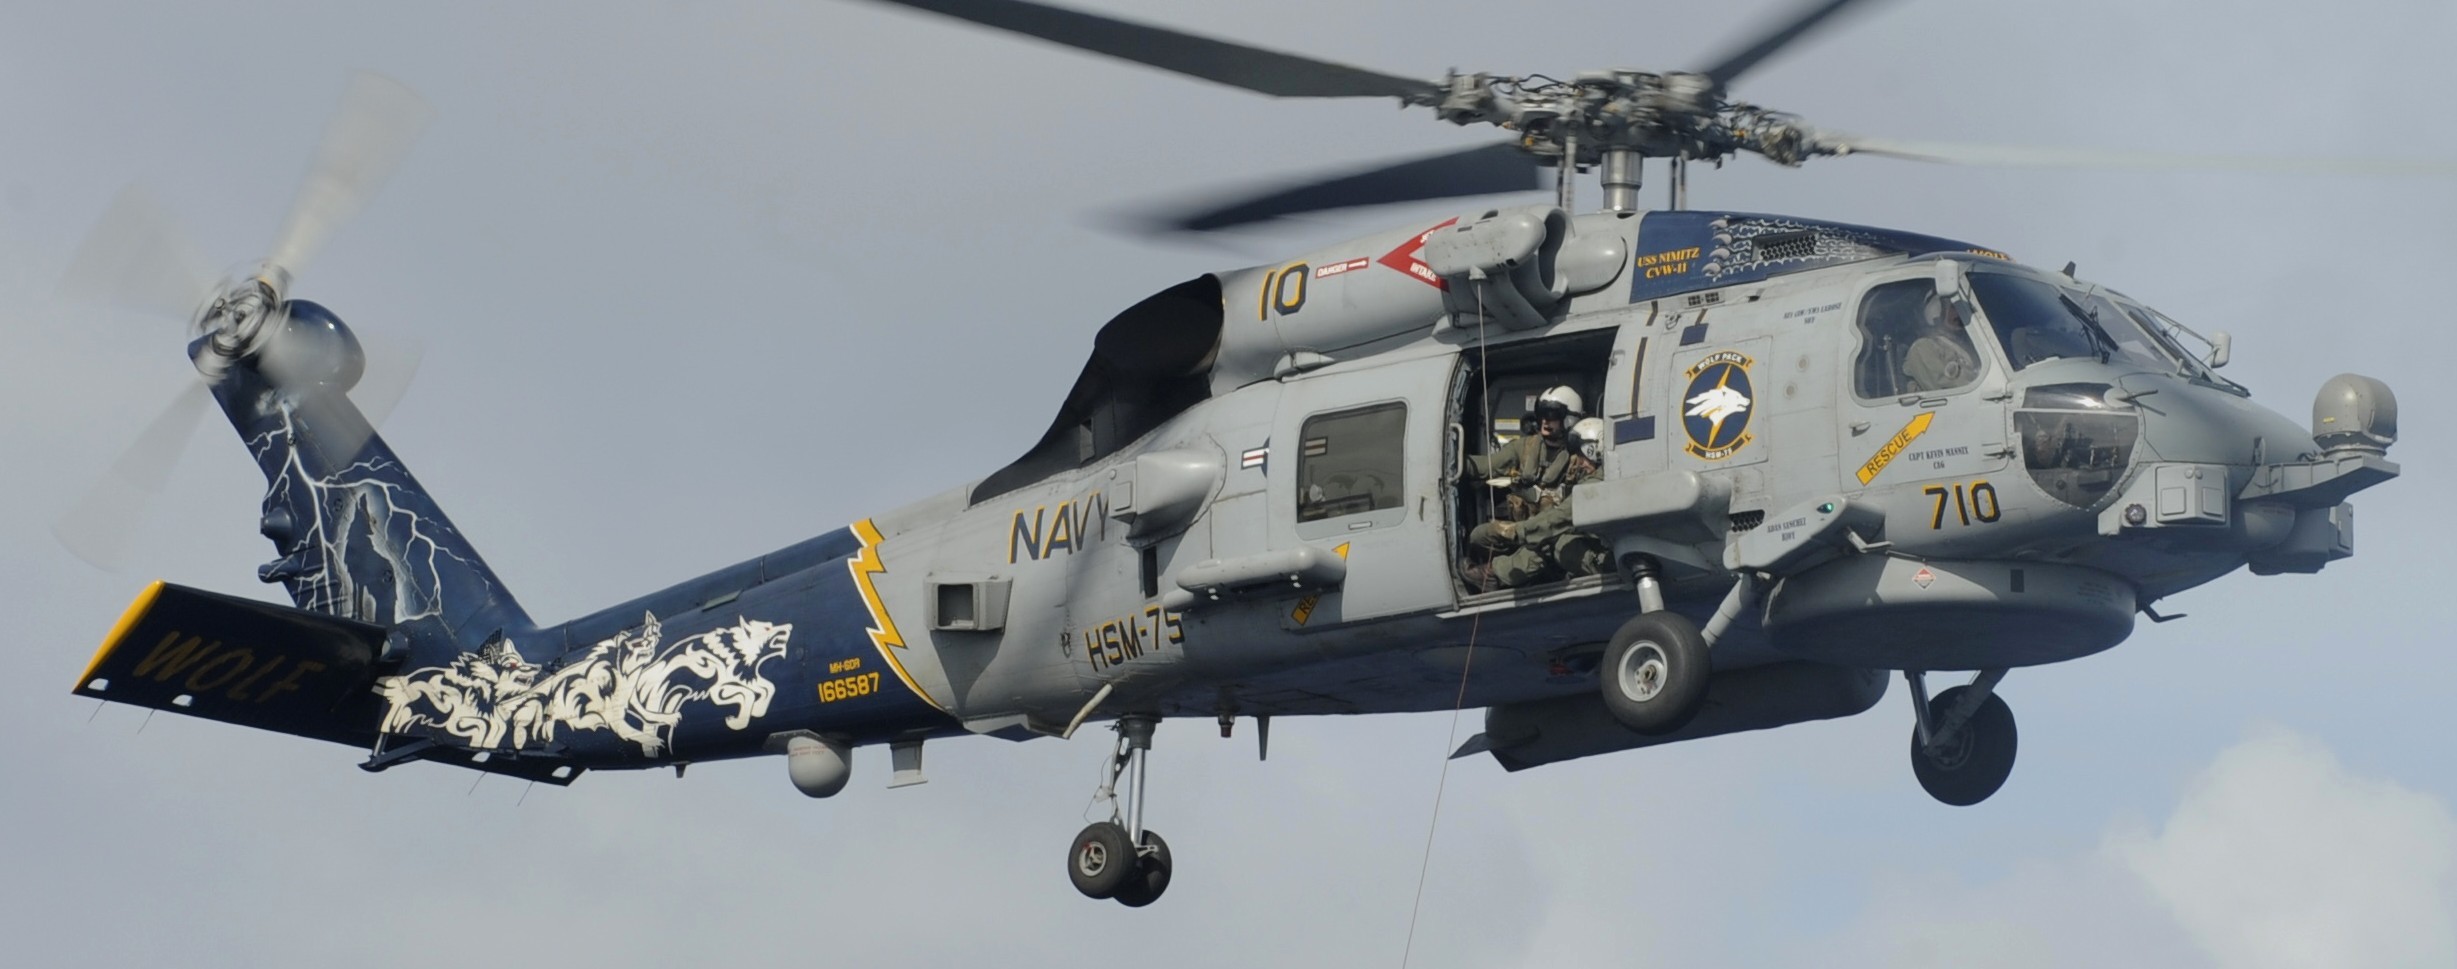 hsm-75 wolf pack helicopter maritime strike squadron mh-60r seahawk 53